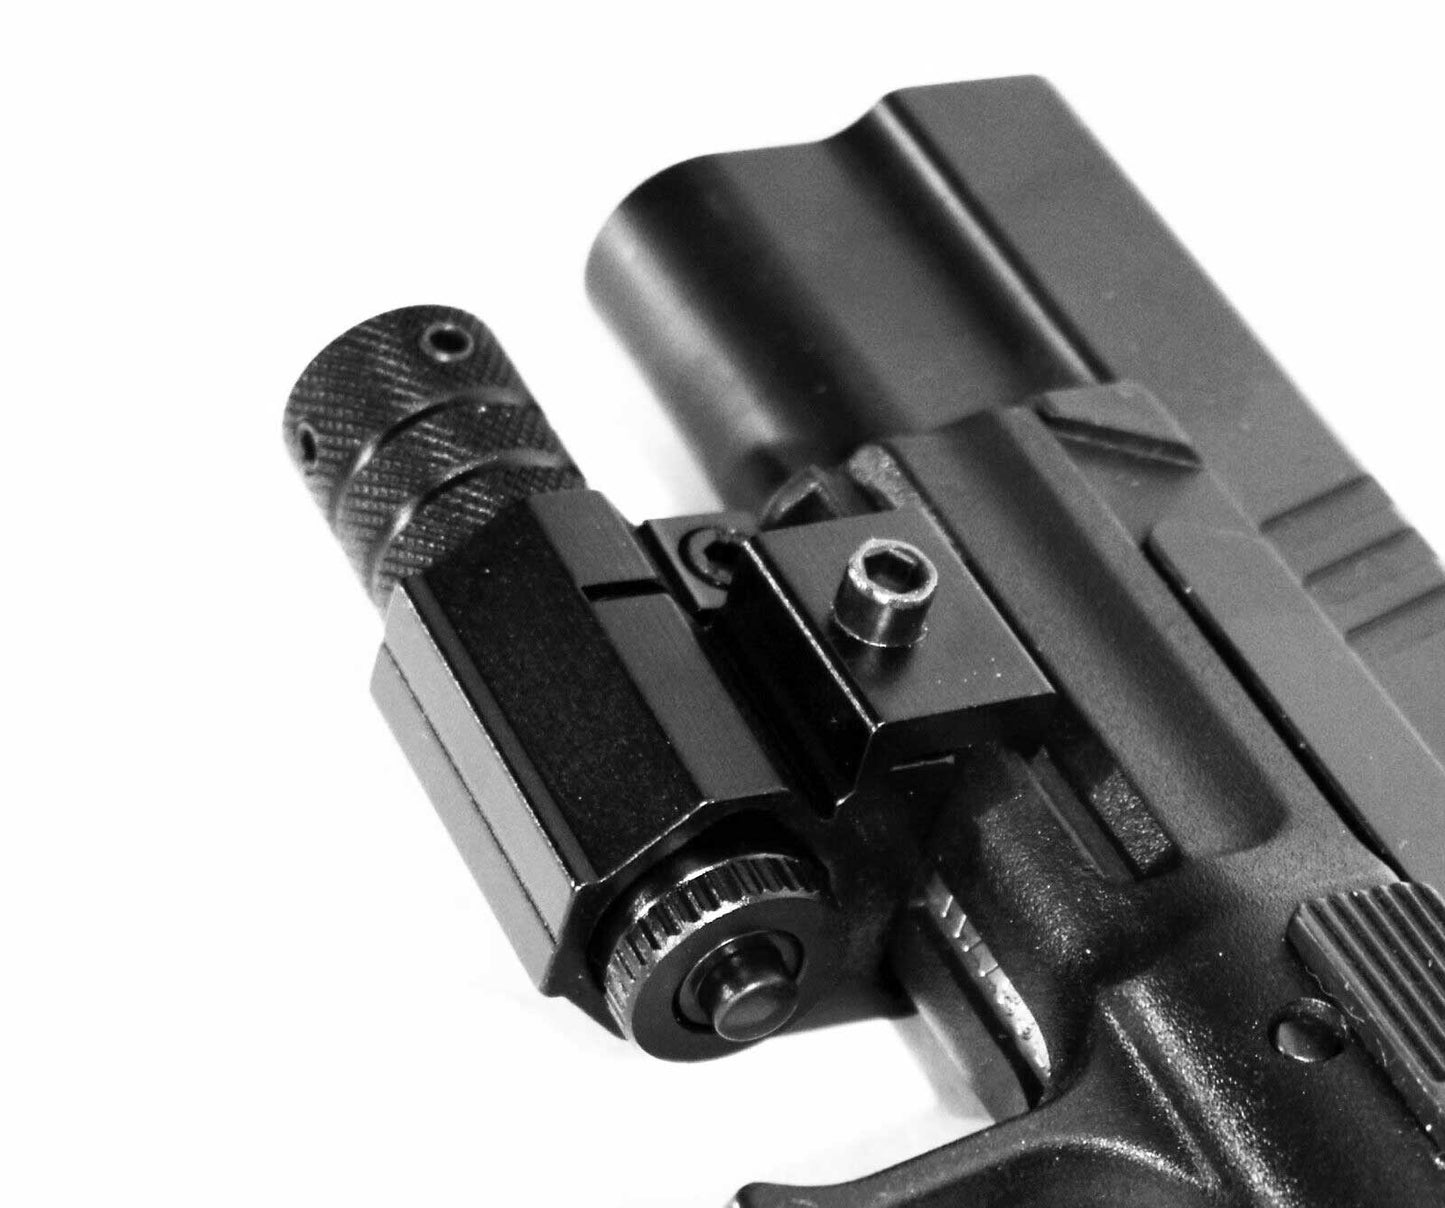 Trinity picatinny Mounted red dot laser Sight For Glock 19 Gen5 accessories home defense.